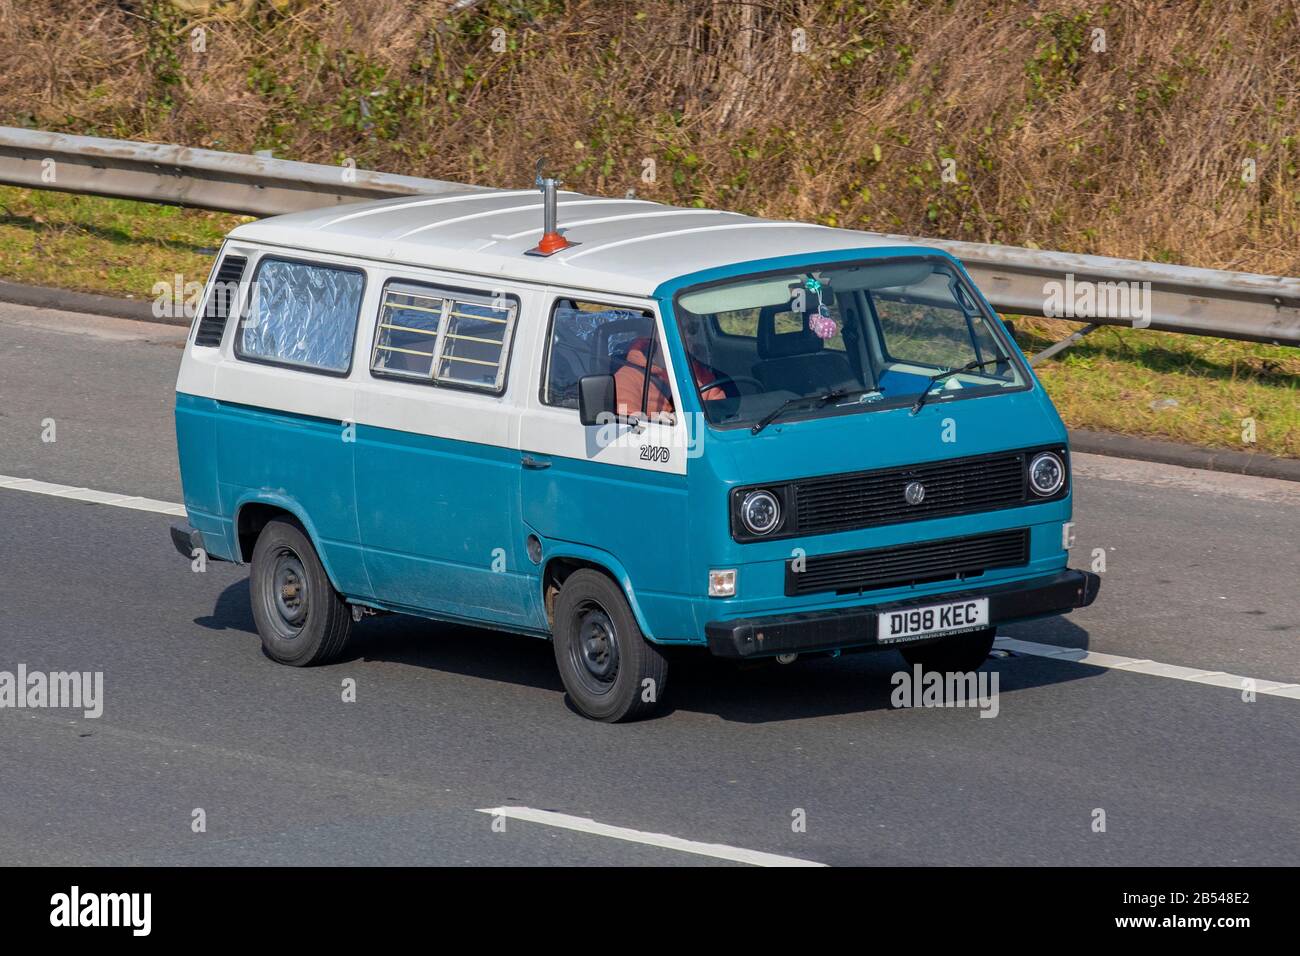 1987 80s blue white VW Volkswagen campervan; Touring Caravans and Motorhomes, campervans on Britain's roads, RV leisure vehicle, family holidays, caravanette vacations, caravan holiday, van conversions, autohome, life on the road, Stock Photo